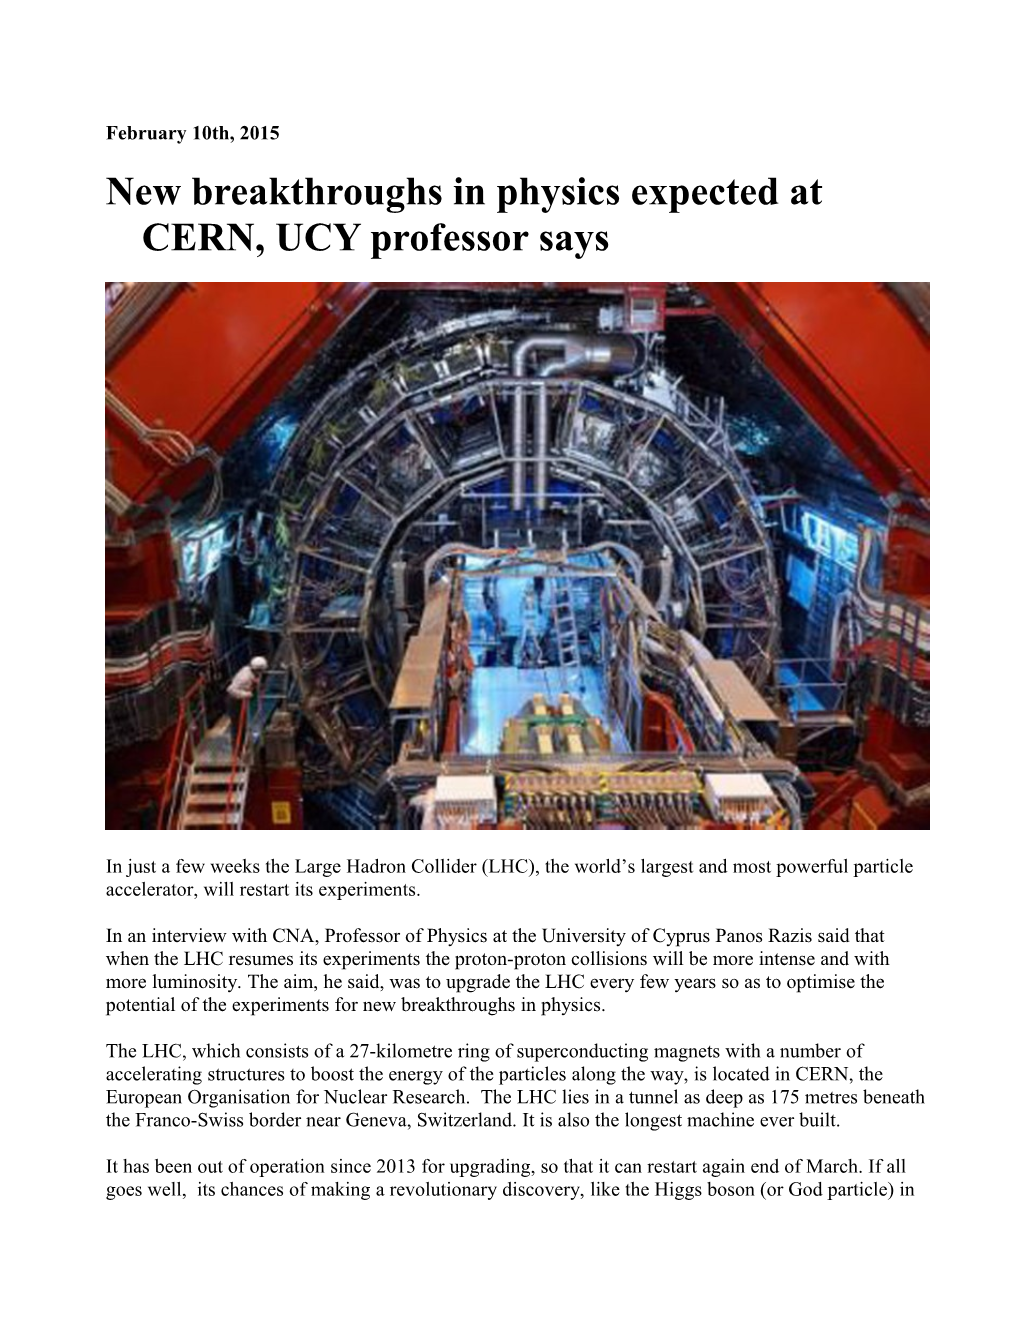 New Breakthroughs in Physics Expected at CERN, UCY Professor Says